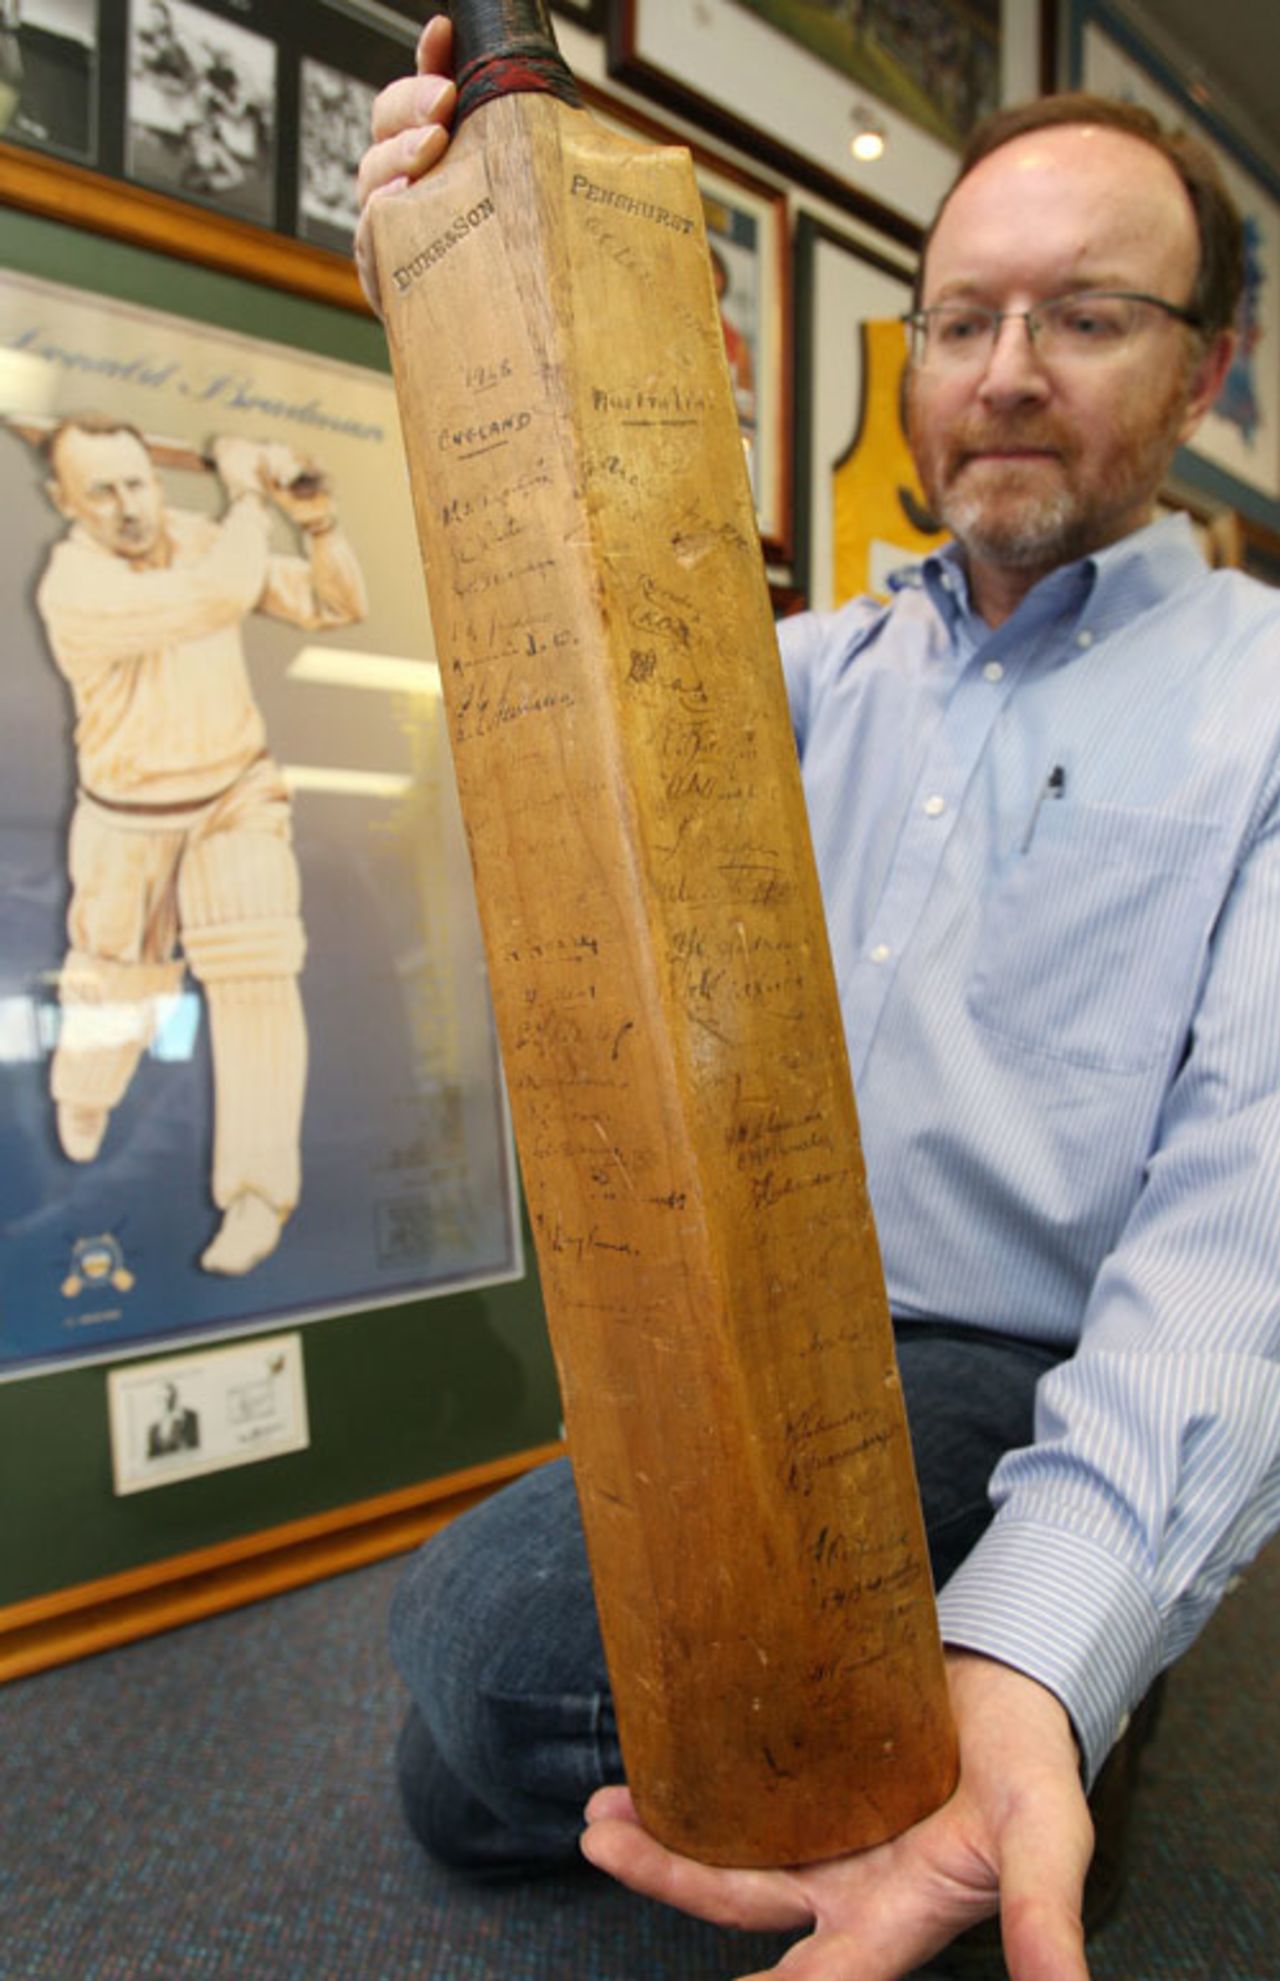 Auctioneer Charles Leski holds up the first cricket bat used by Sir Donald Bradman in his Test career and which will be auctioned off in Melbourne. The bat did not see much action in that first Test, but is expected to fetch up to US$100,000 when auctioned. Bradman was dropped after an inauspicious debut in which he scored 18 and one in Australia's 675-run thrashing by England in the first Test in Brisbane in 1928-29. The bat was signed by the entire 1928-29 Australian team as well as the conquering English who won the series 4-1. Forty-seven signatures in total are on the bat. Melbourne, September 24, 2008